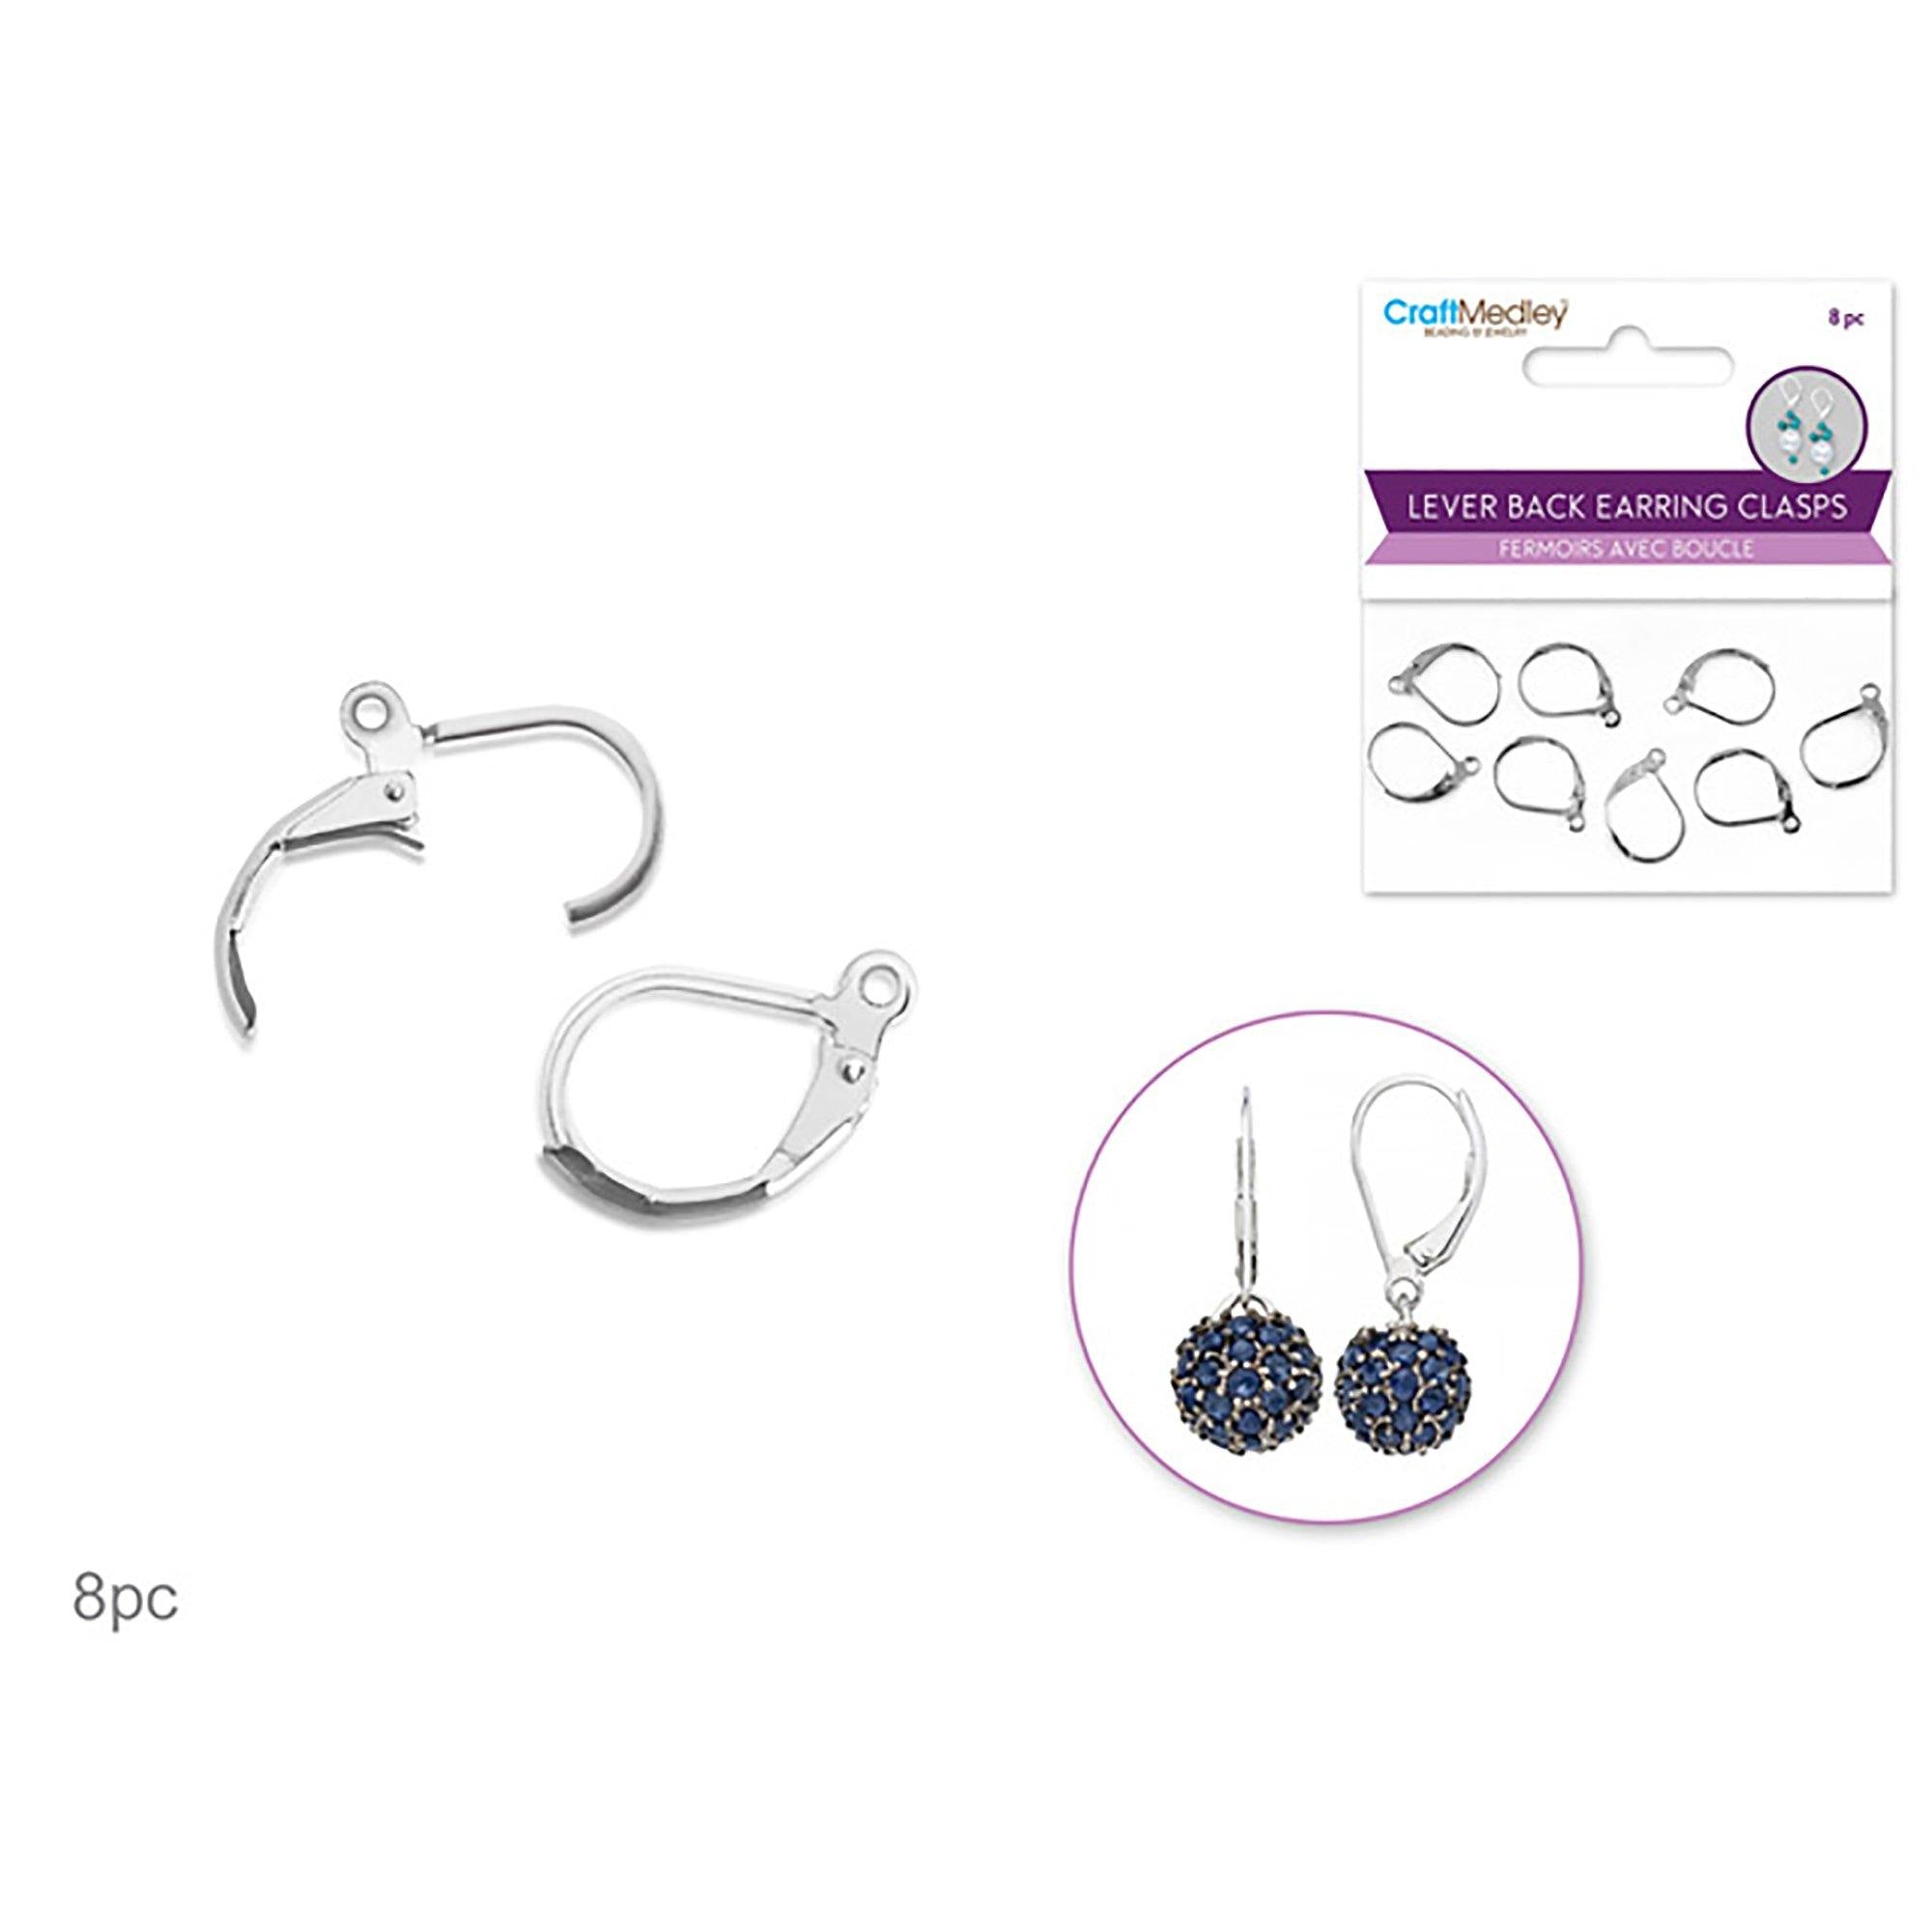 Silver Jewelry Findings: 15Mmx11Mm Lever Back Earring Clasp X8 W/Loop - Dollar Max Dépôt